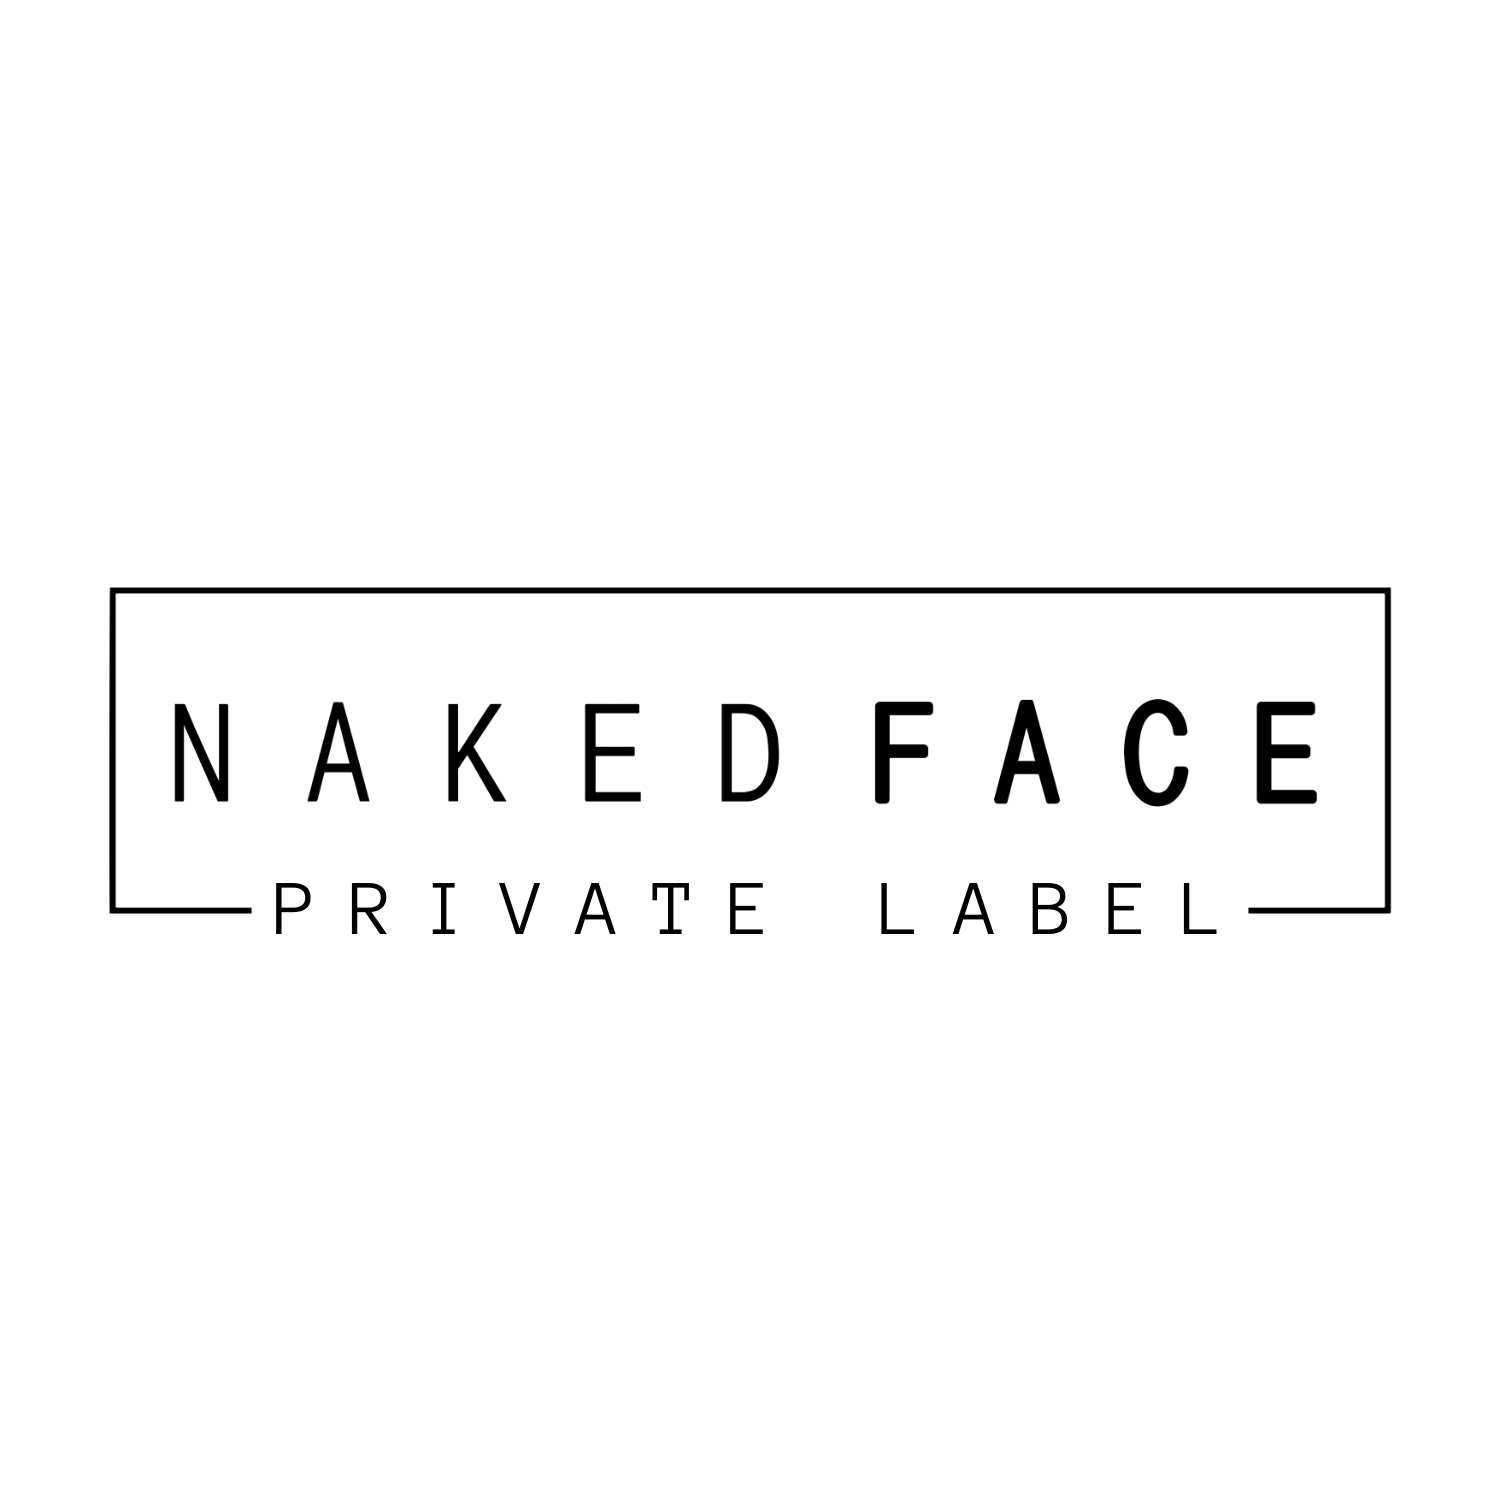 Naked Face Private Label